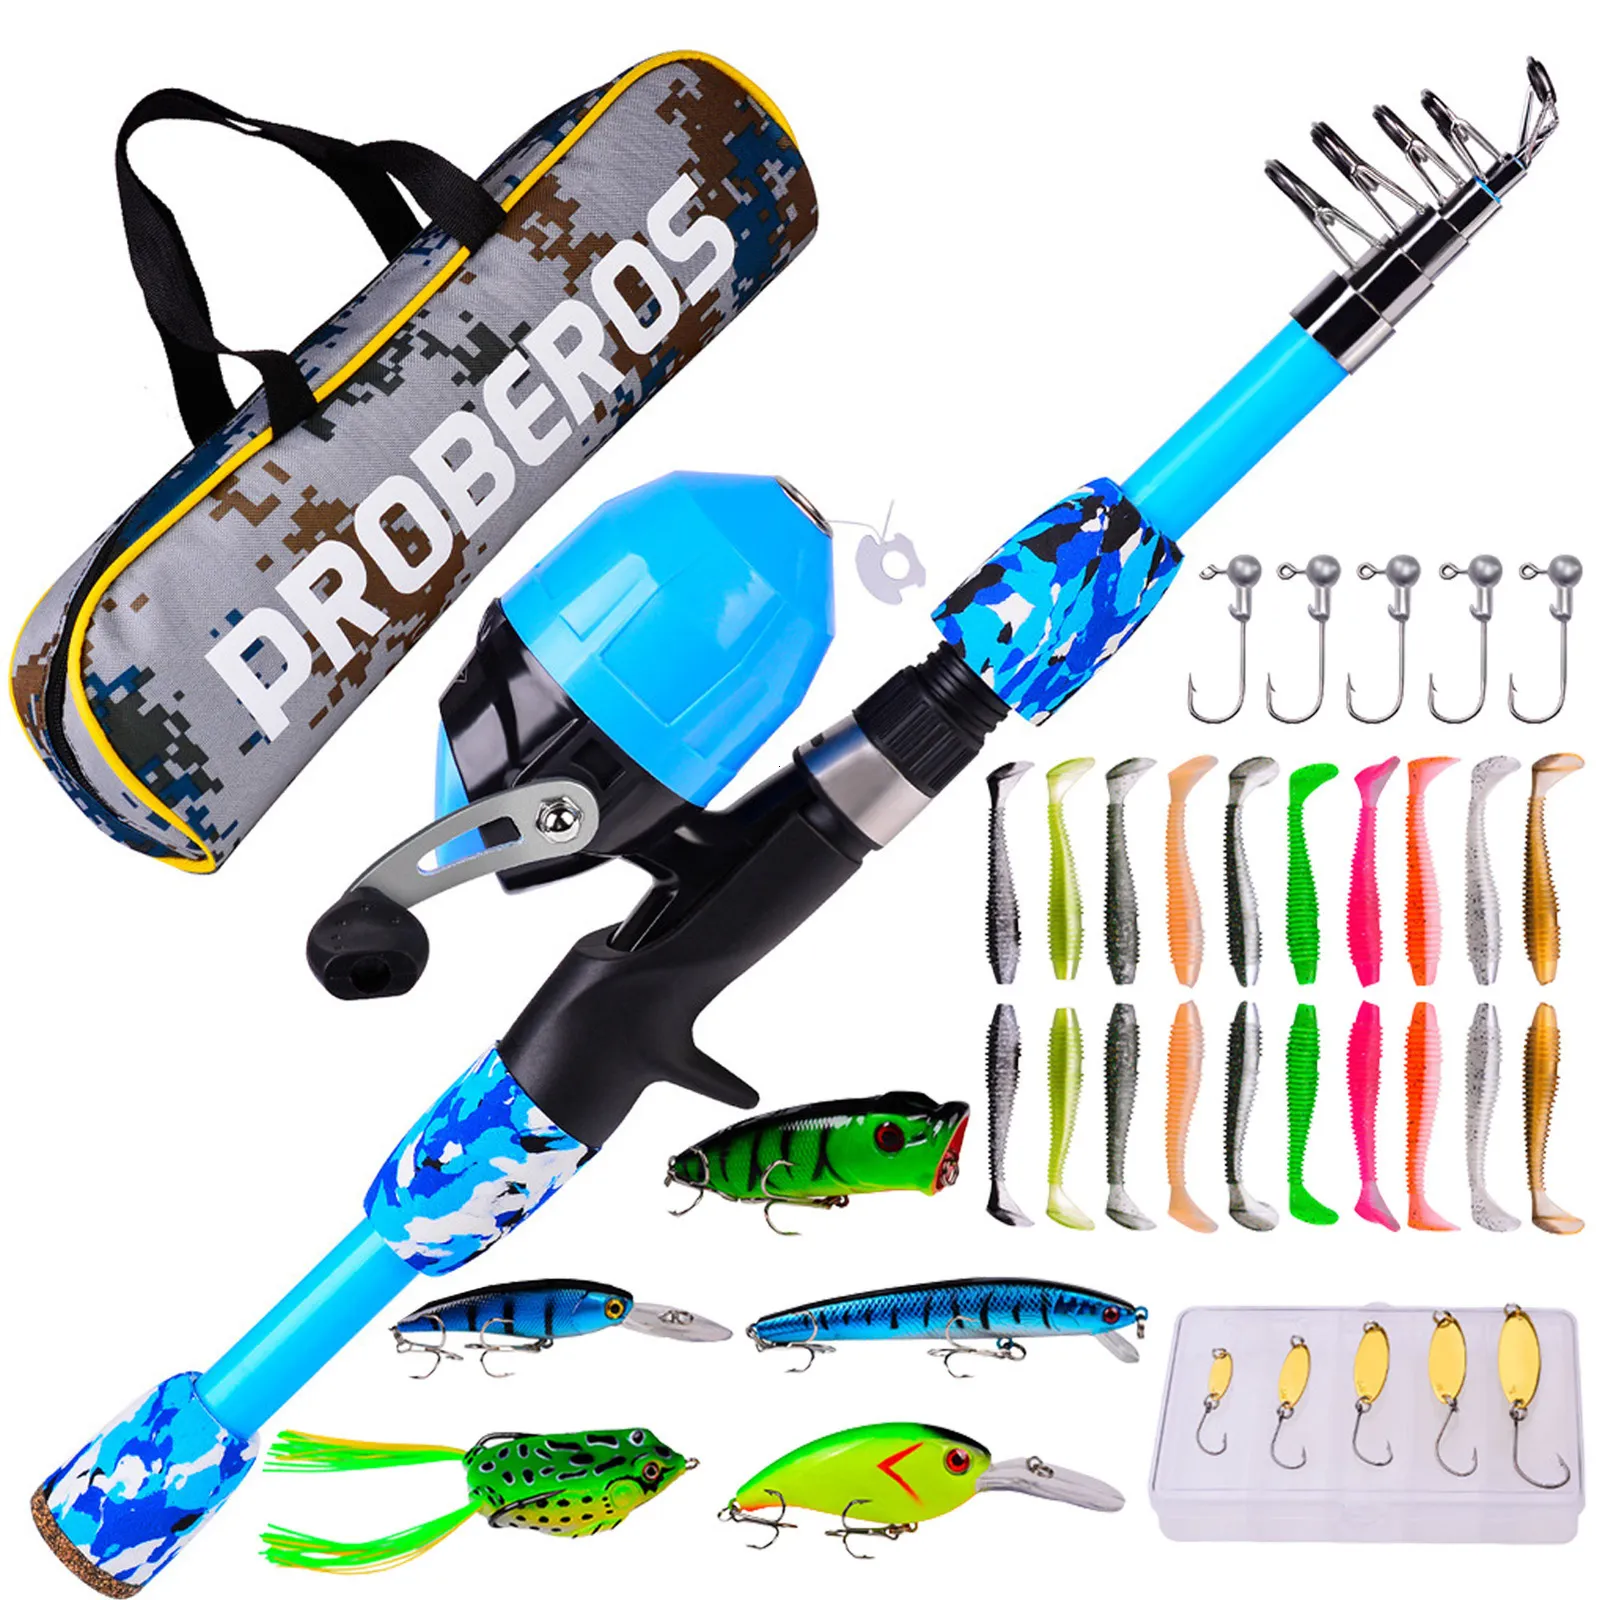 Full Kit Kids Childrens Fishing Rod Reel Combo With Telescopic And